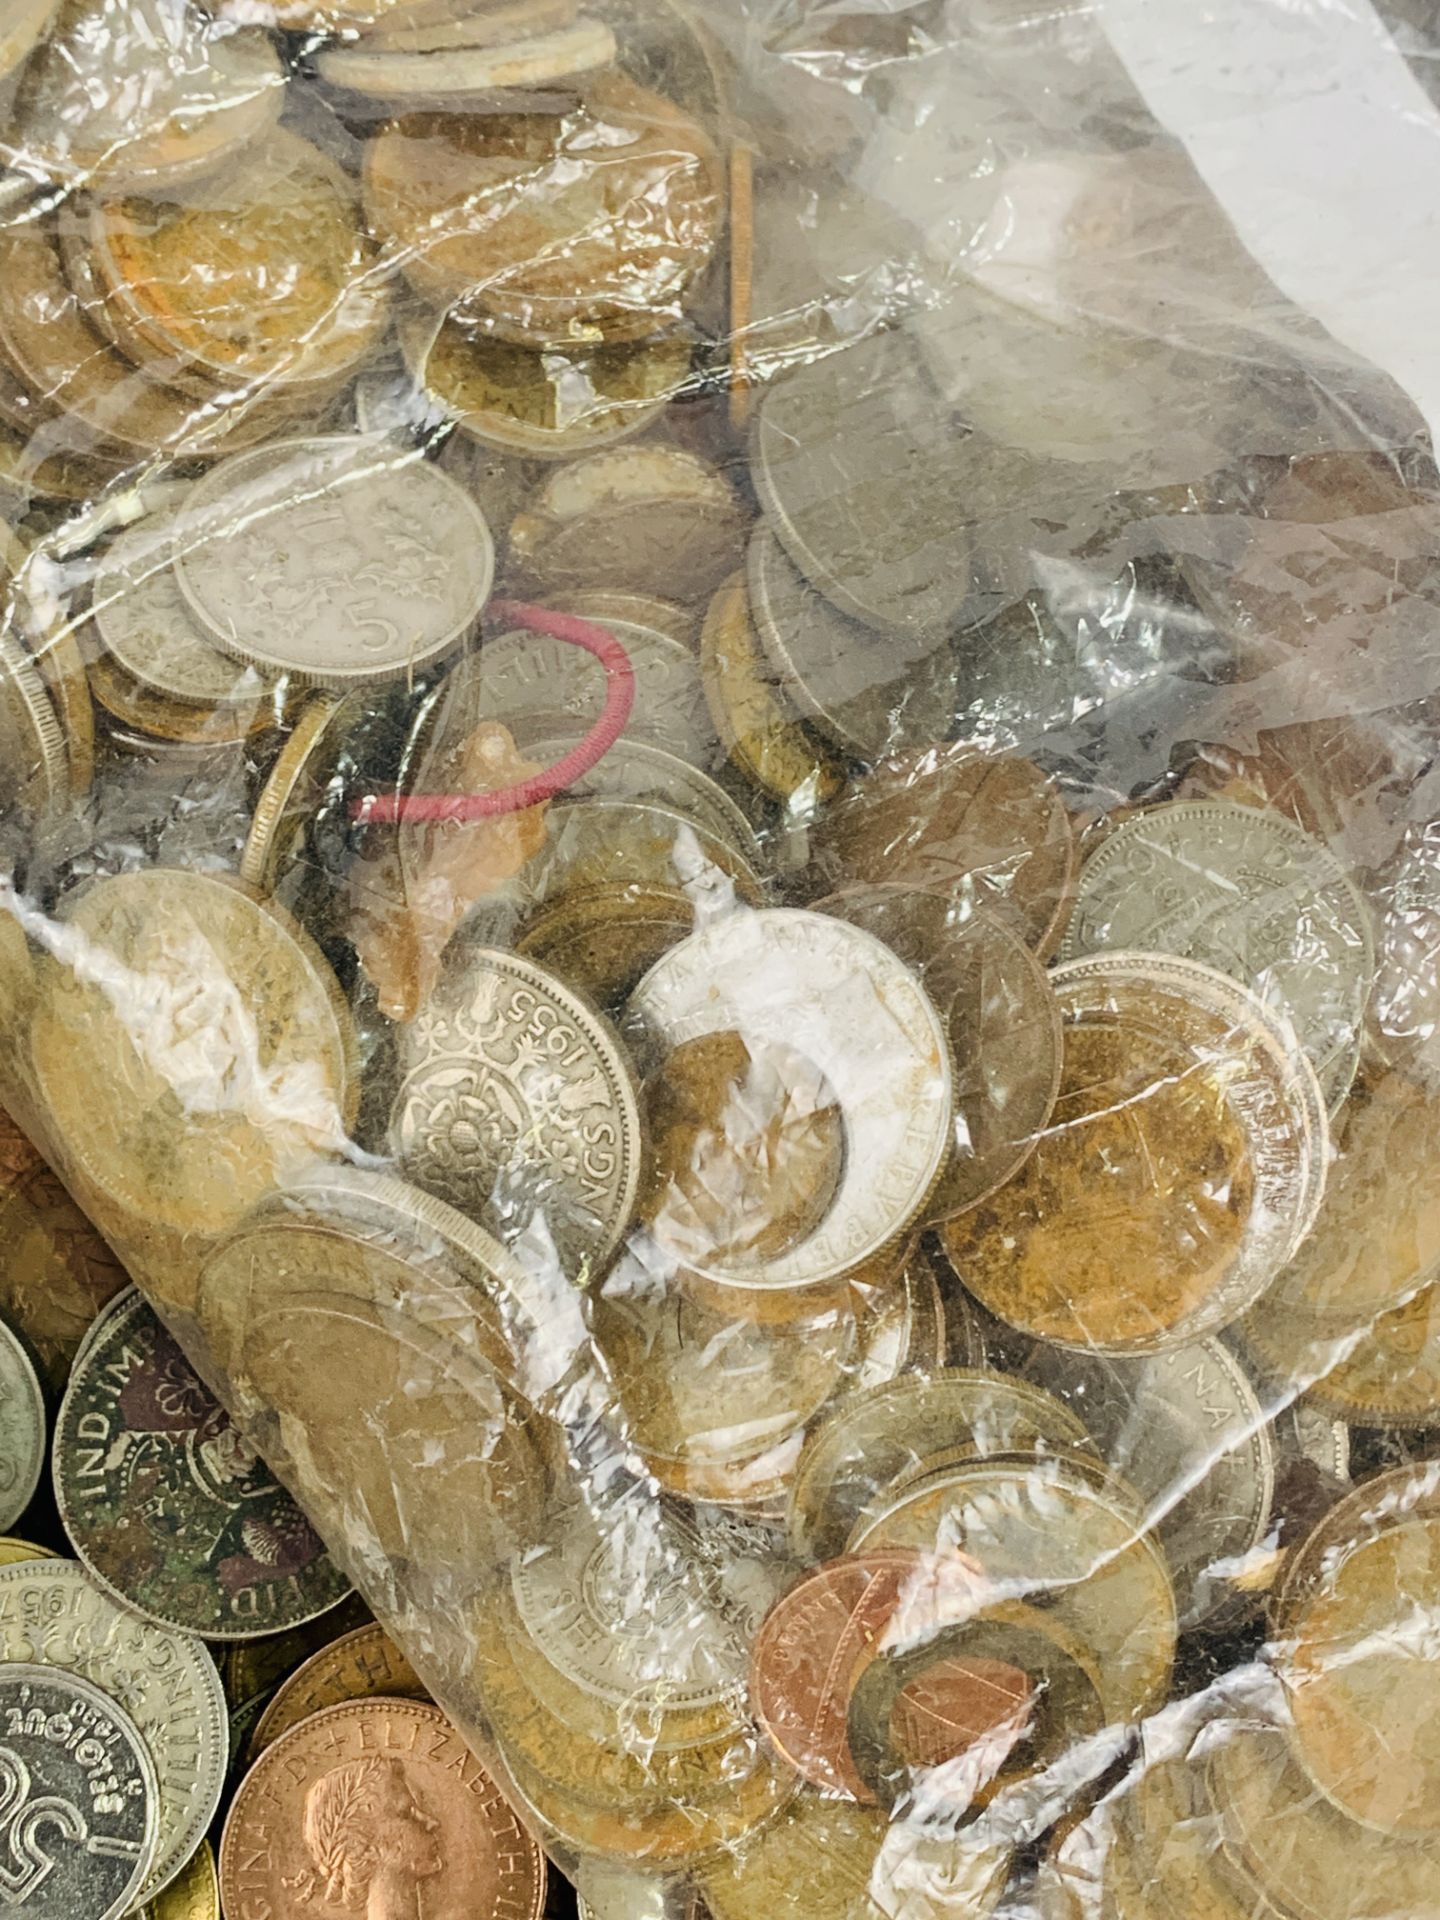 Large quantity of mainly European coins. - Image 2 of 2